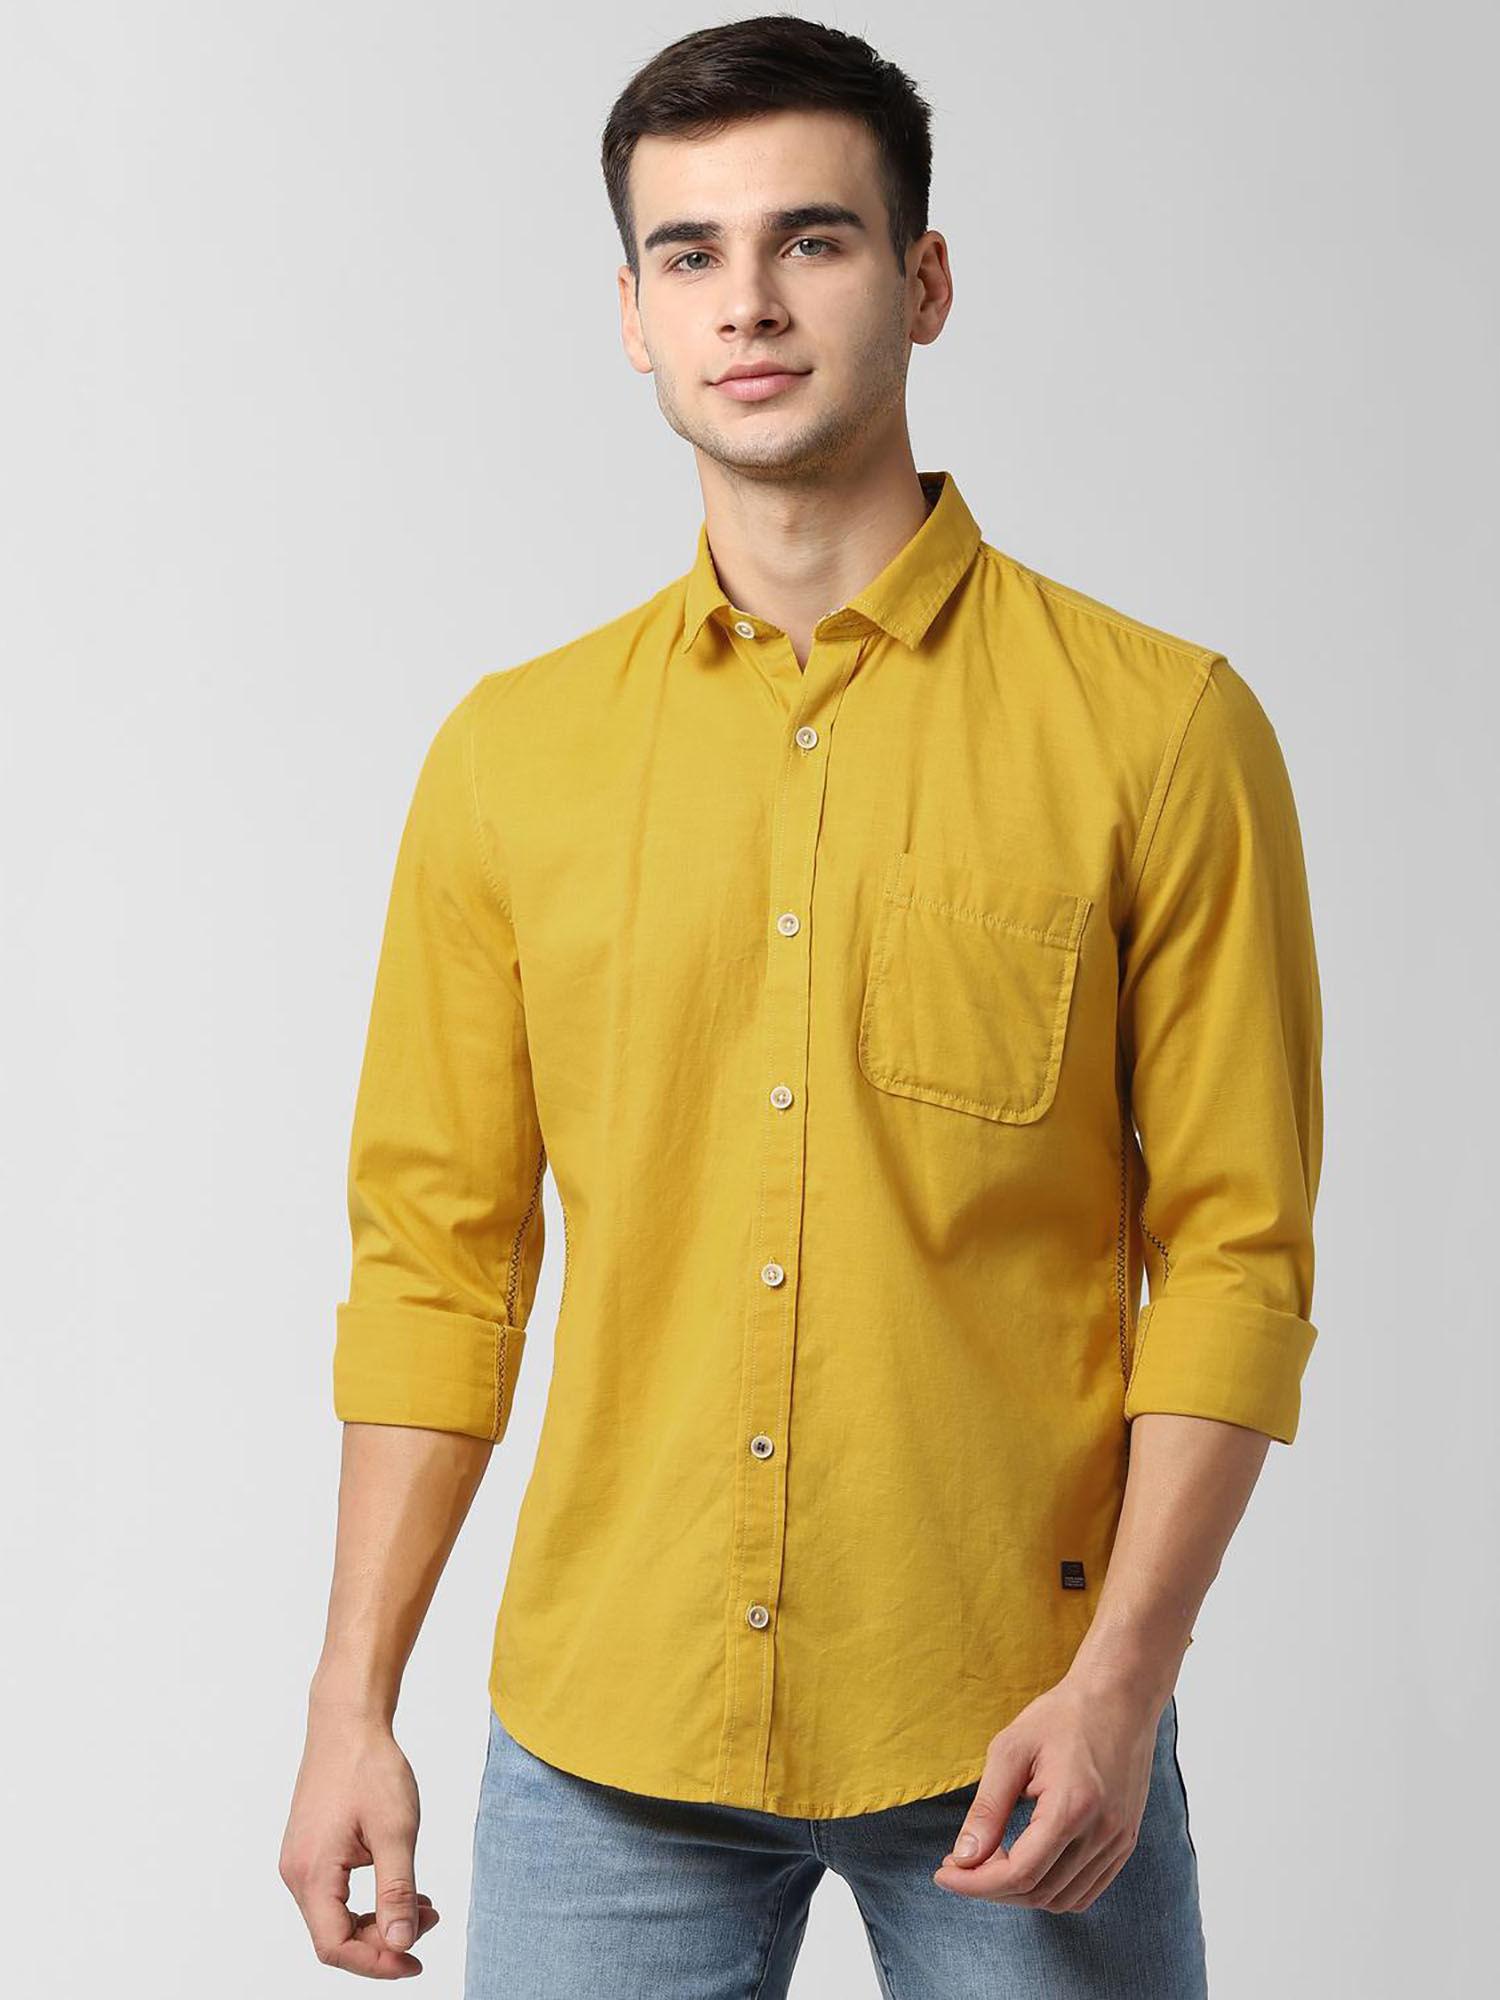 yellow solid full sleeves casual shirt